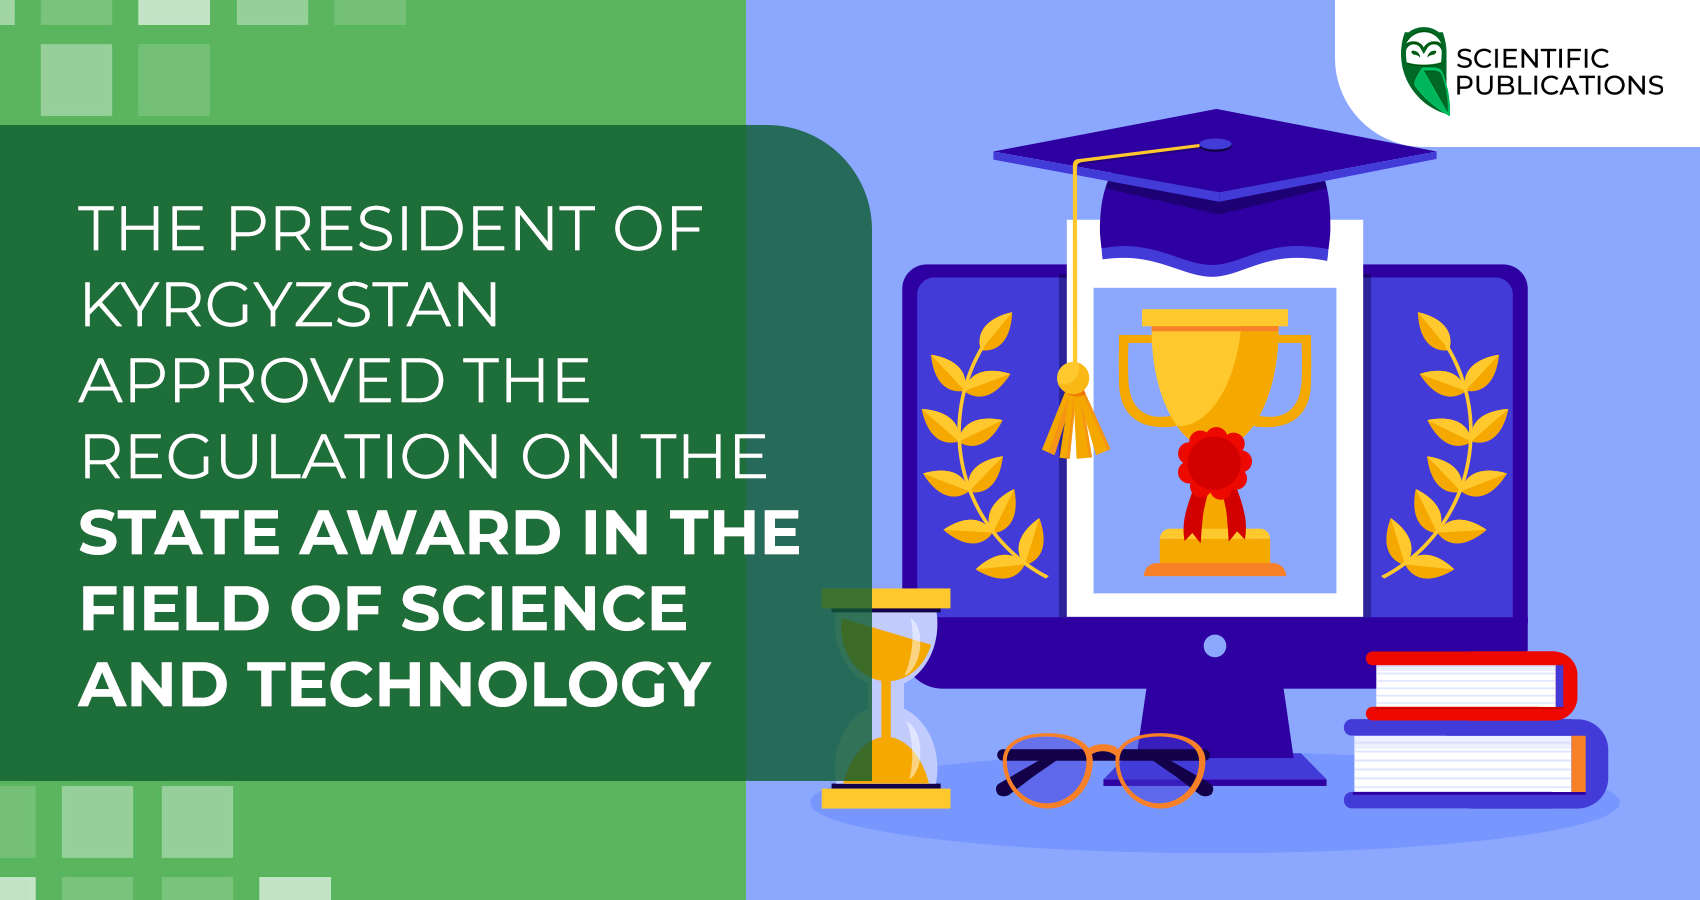 The President of Kyrgyzstan approved the regulation on the state award in the field of science and technology